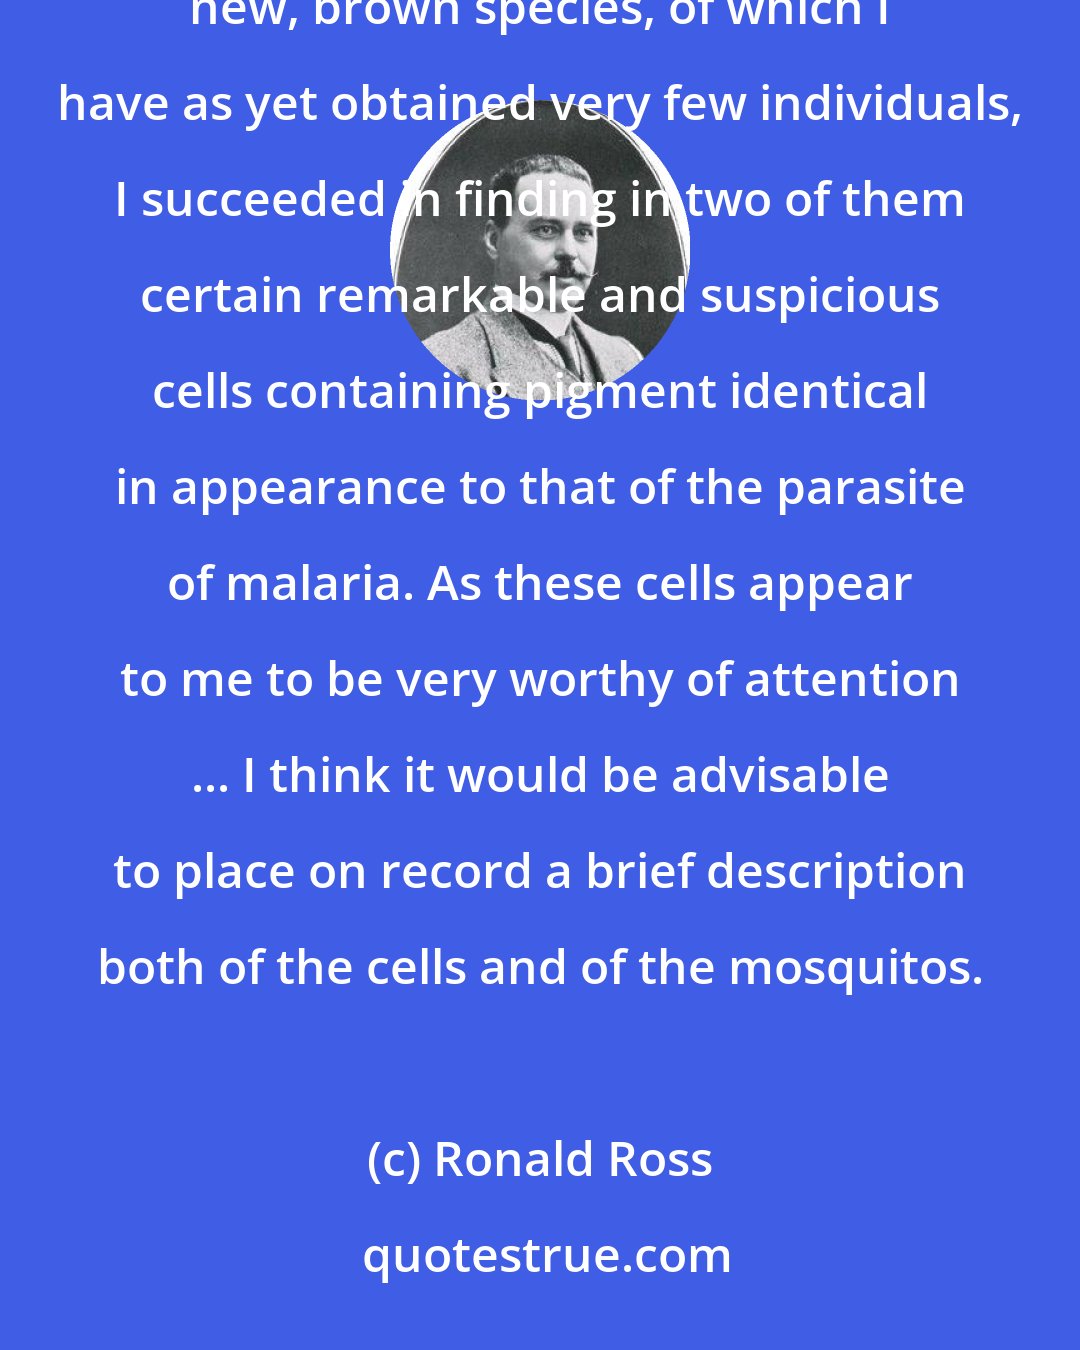 Ronald Ross: Lately, however, on abandoning the brindled and grey mosquitos and commencing similar work on a new, brown species, of which I have as yet obtained very few individuals, I succeeded in finding in two of them certain remarkable and suspicious cells containing pigment identical in appearance to that of the parasite of malaria. As these cells appear to me to be very worthy of attention ... I think it would be advisable to place on record a brief description both of the cells and of the mosquitos.